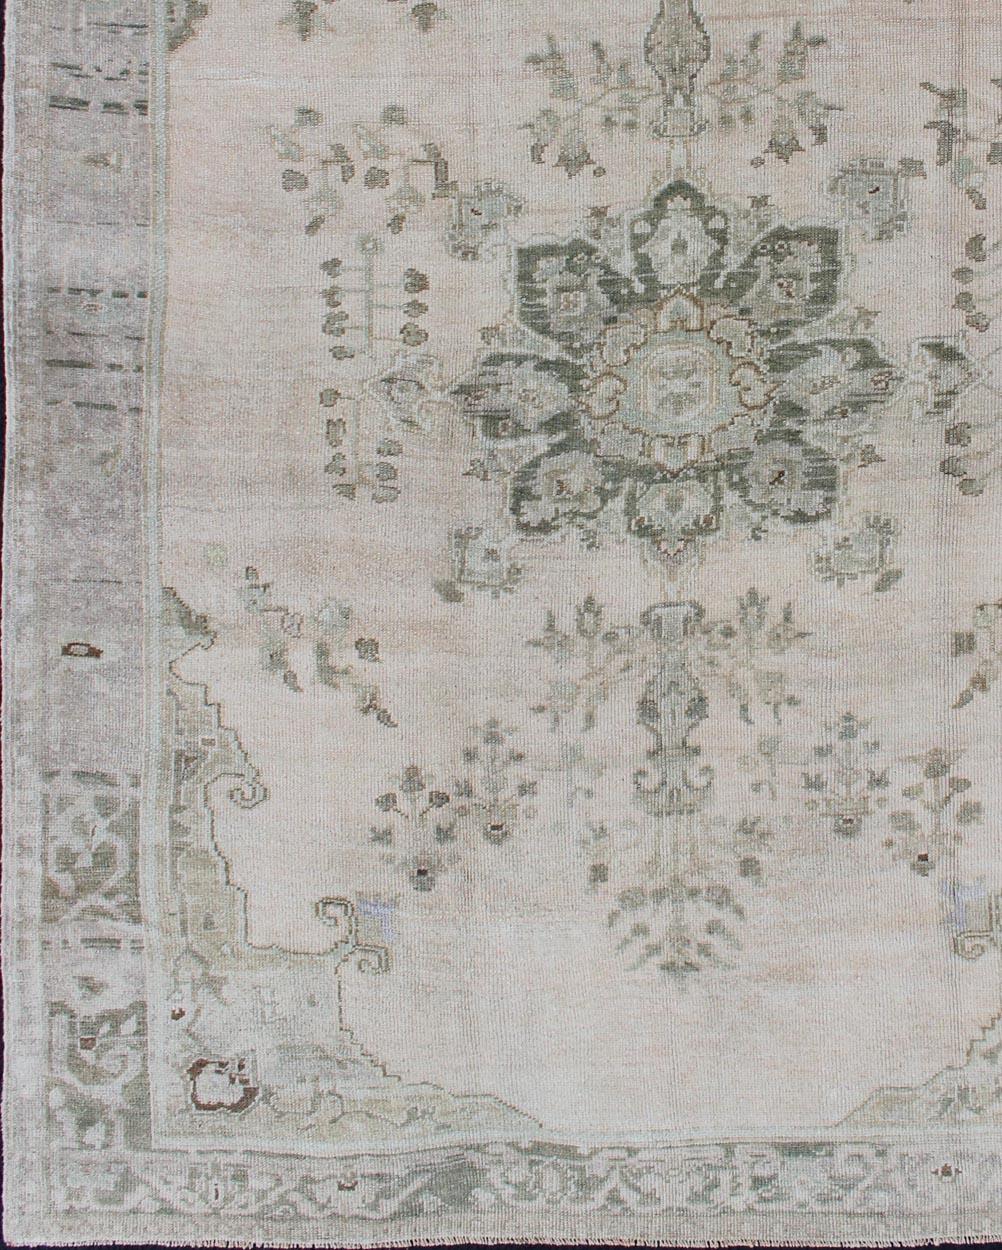 Oushak vintage rug with flower motifs in neutrals, rug tu-alk-4894, country of origin / type: Turkey / Oushak, circa 1940.

A beautiful and versatile piece, this Oushak carpet is rendered in neutral tones and characterized by a traditional floral